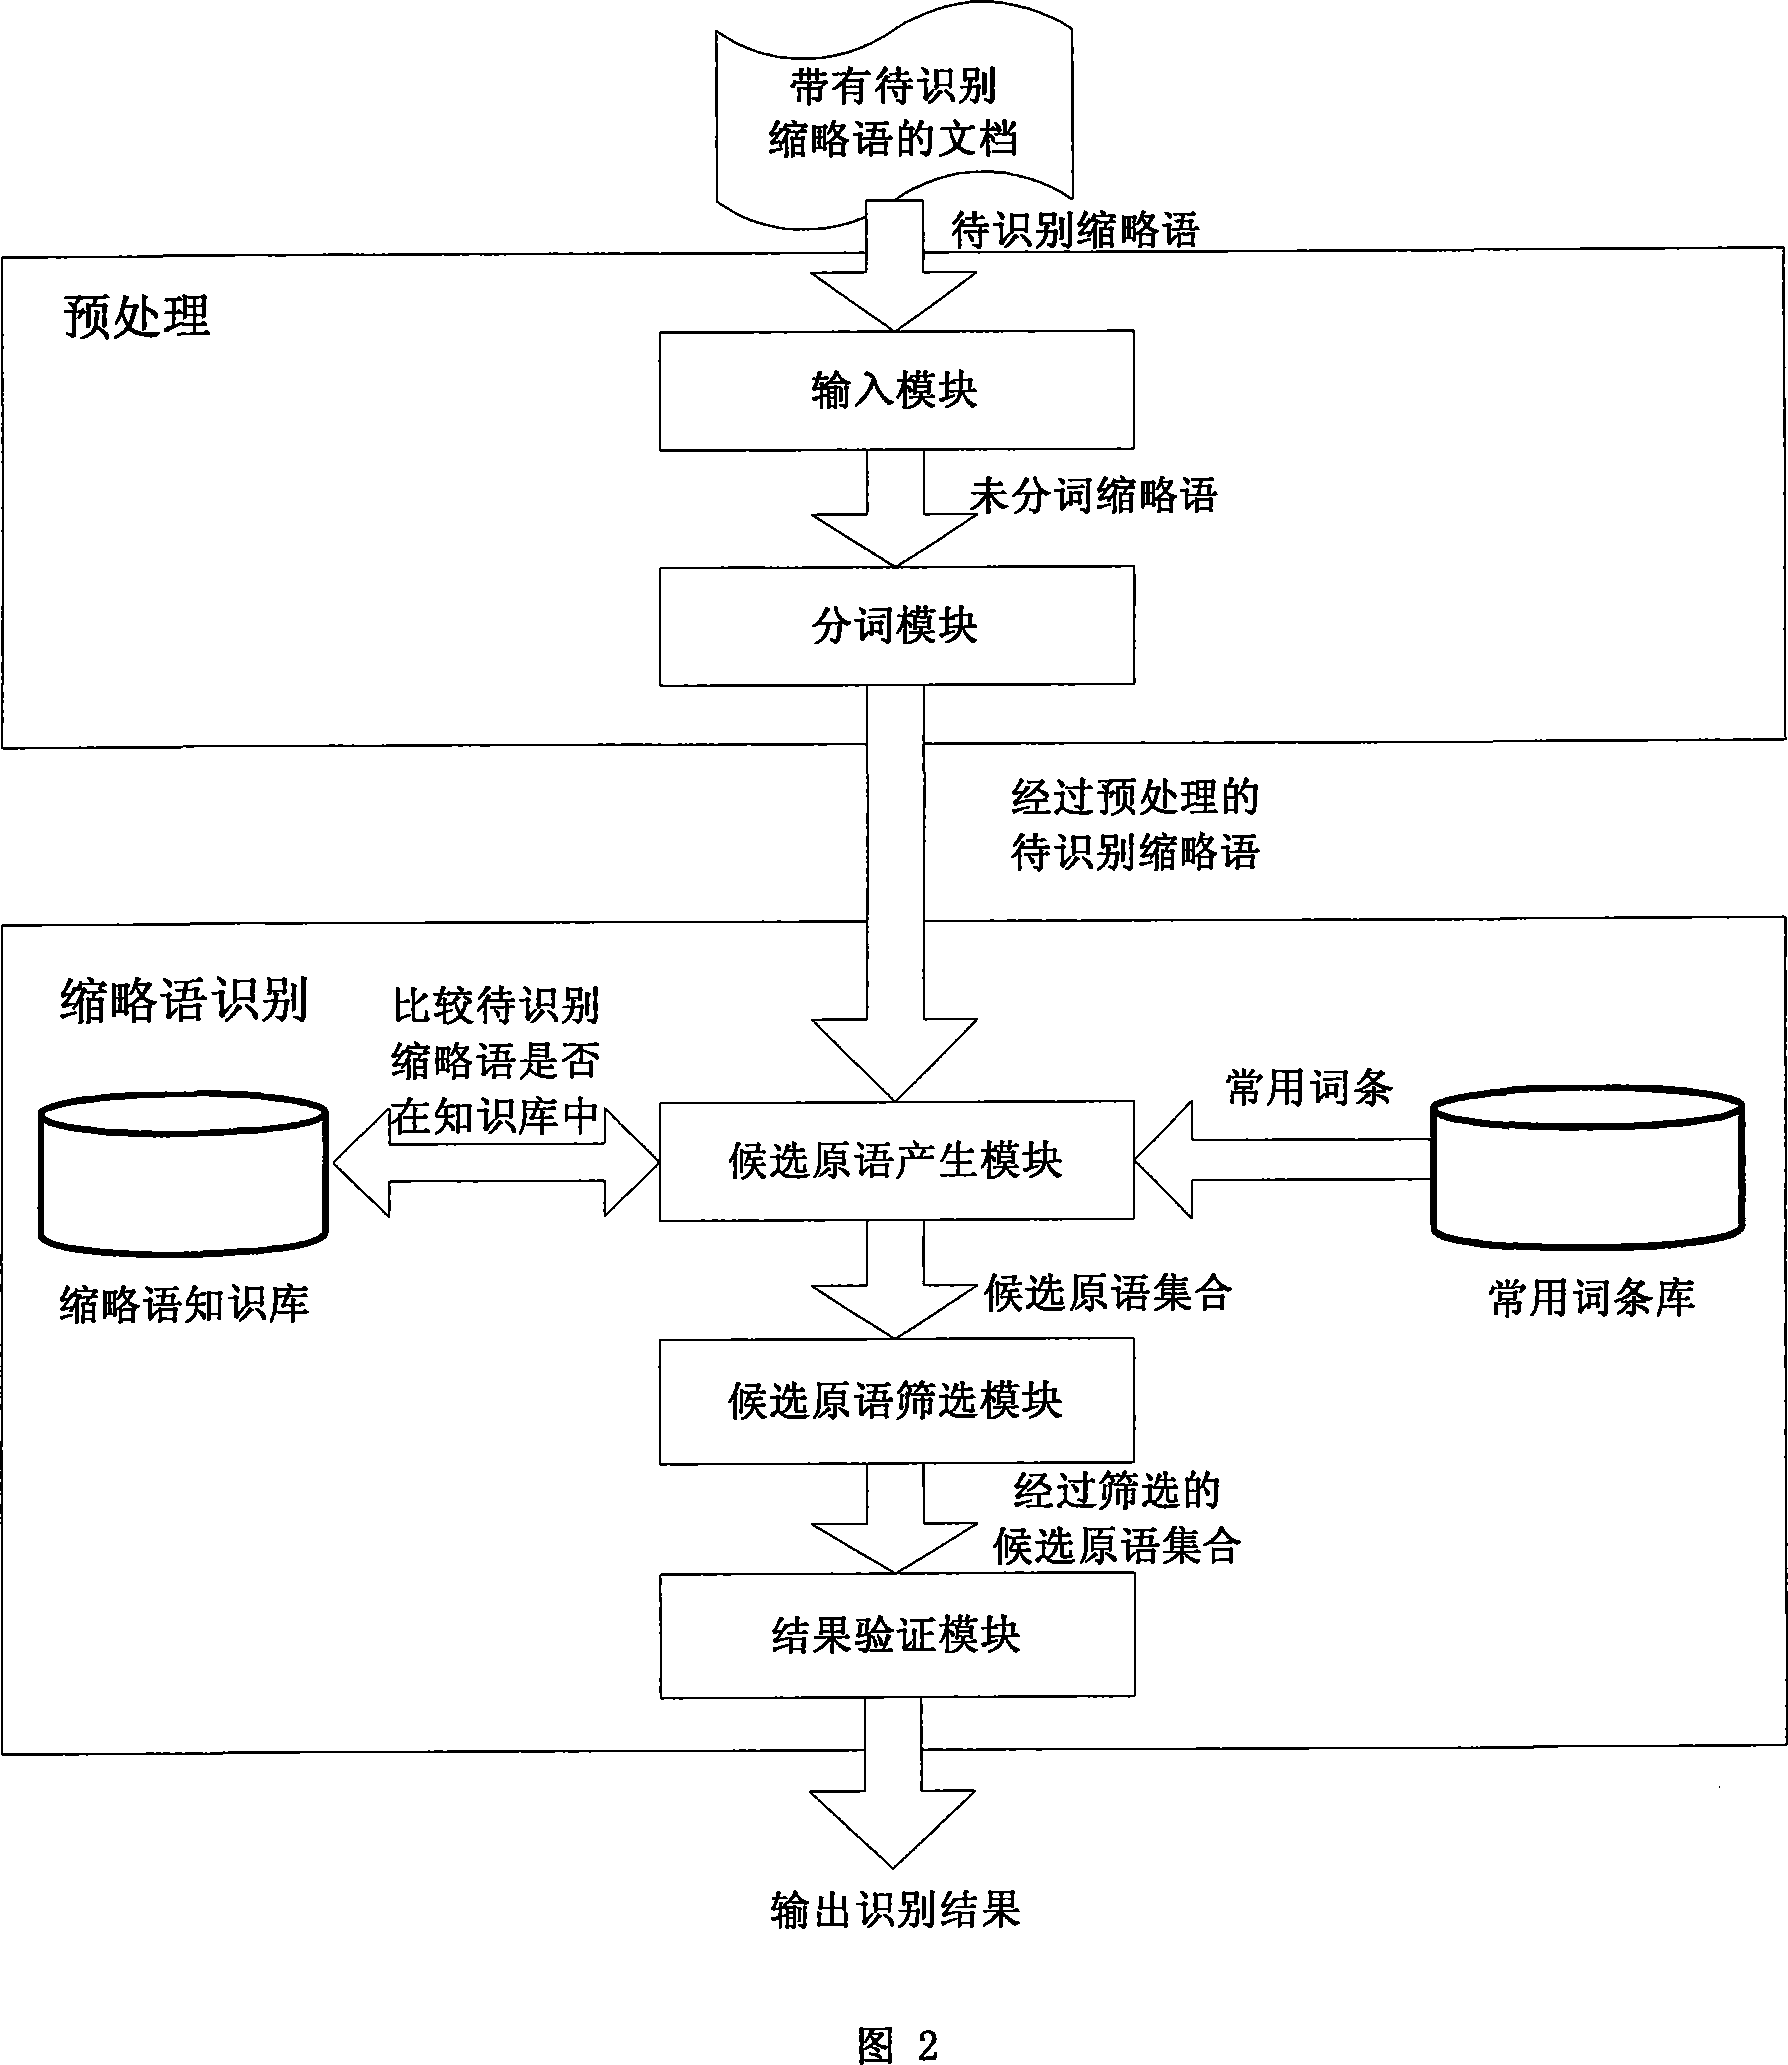 Method and system for identifying Chinese full name based on Chinese shortened form of entity